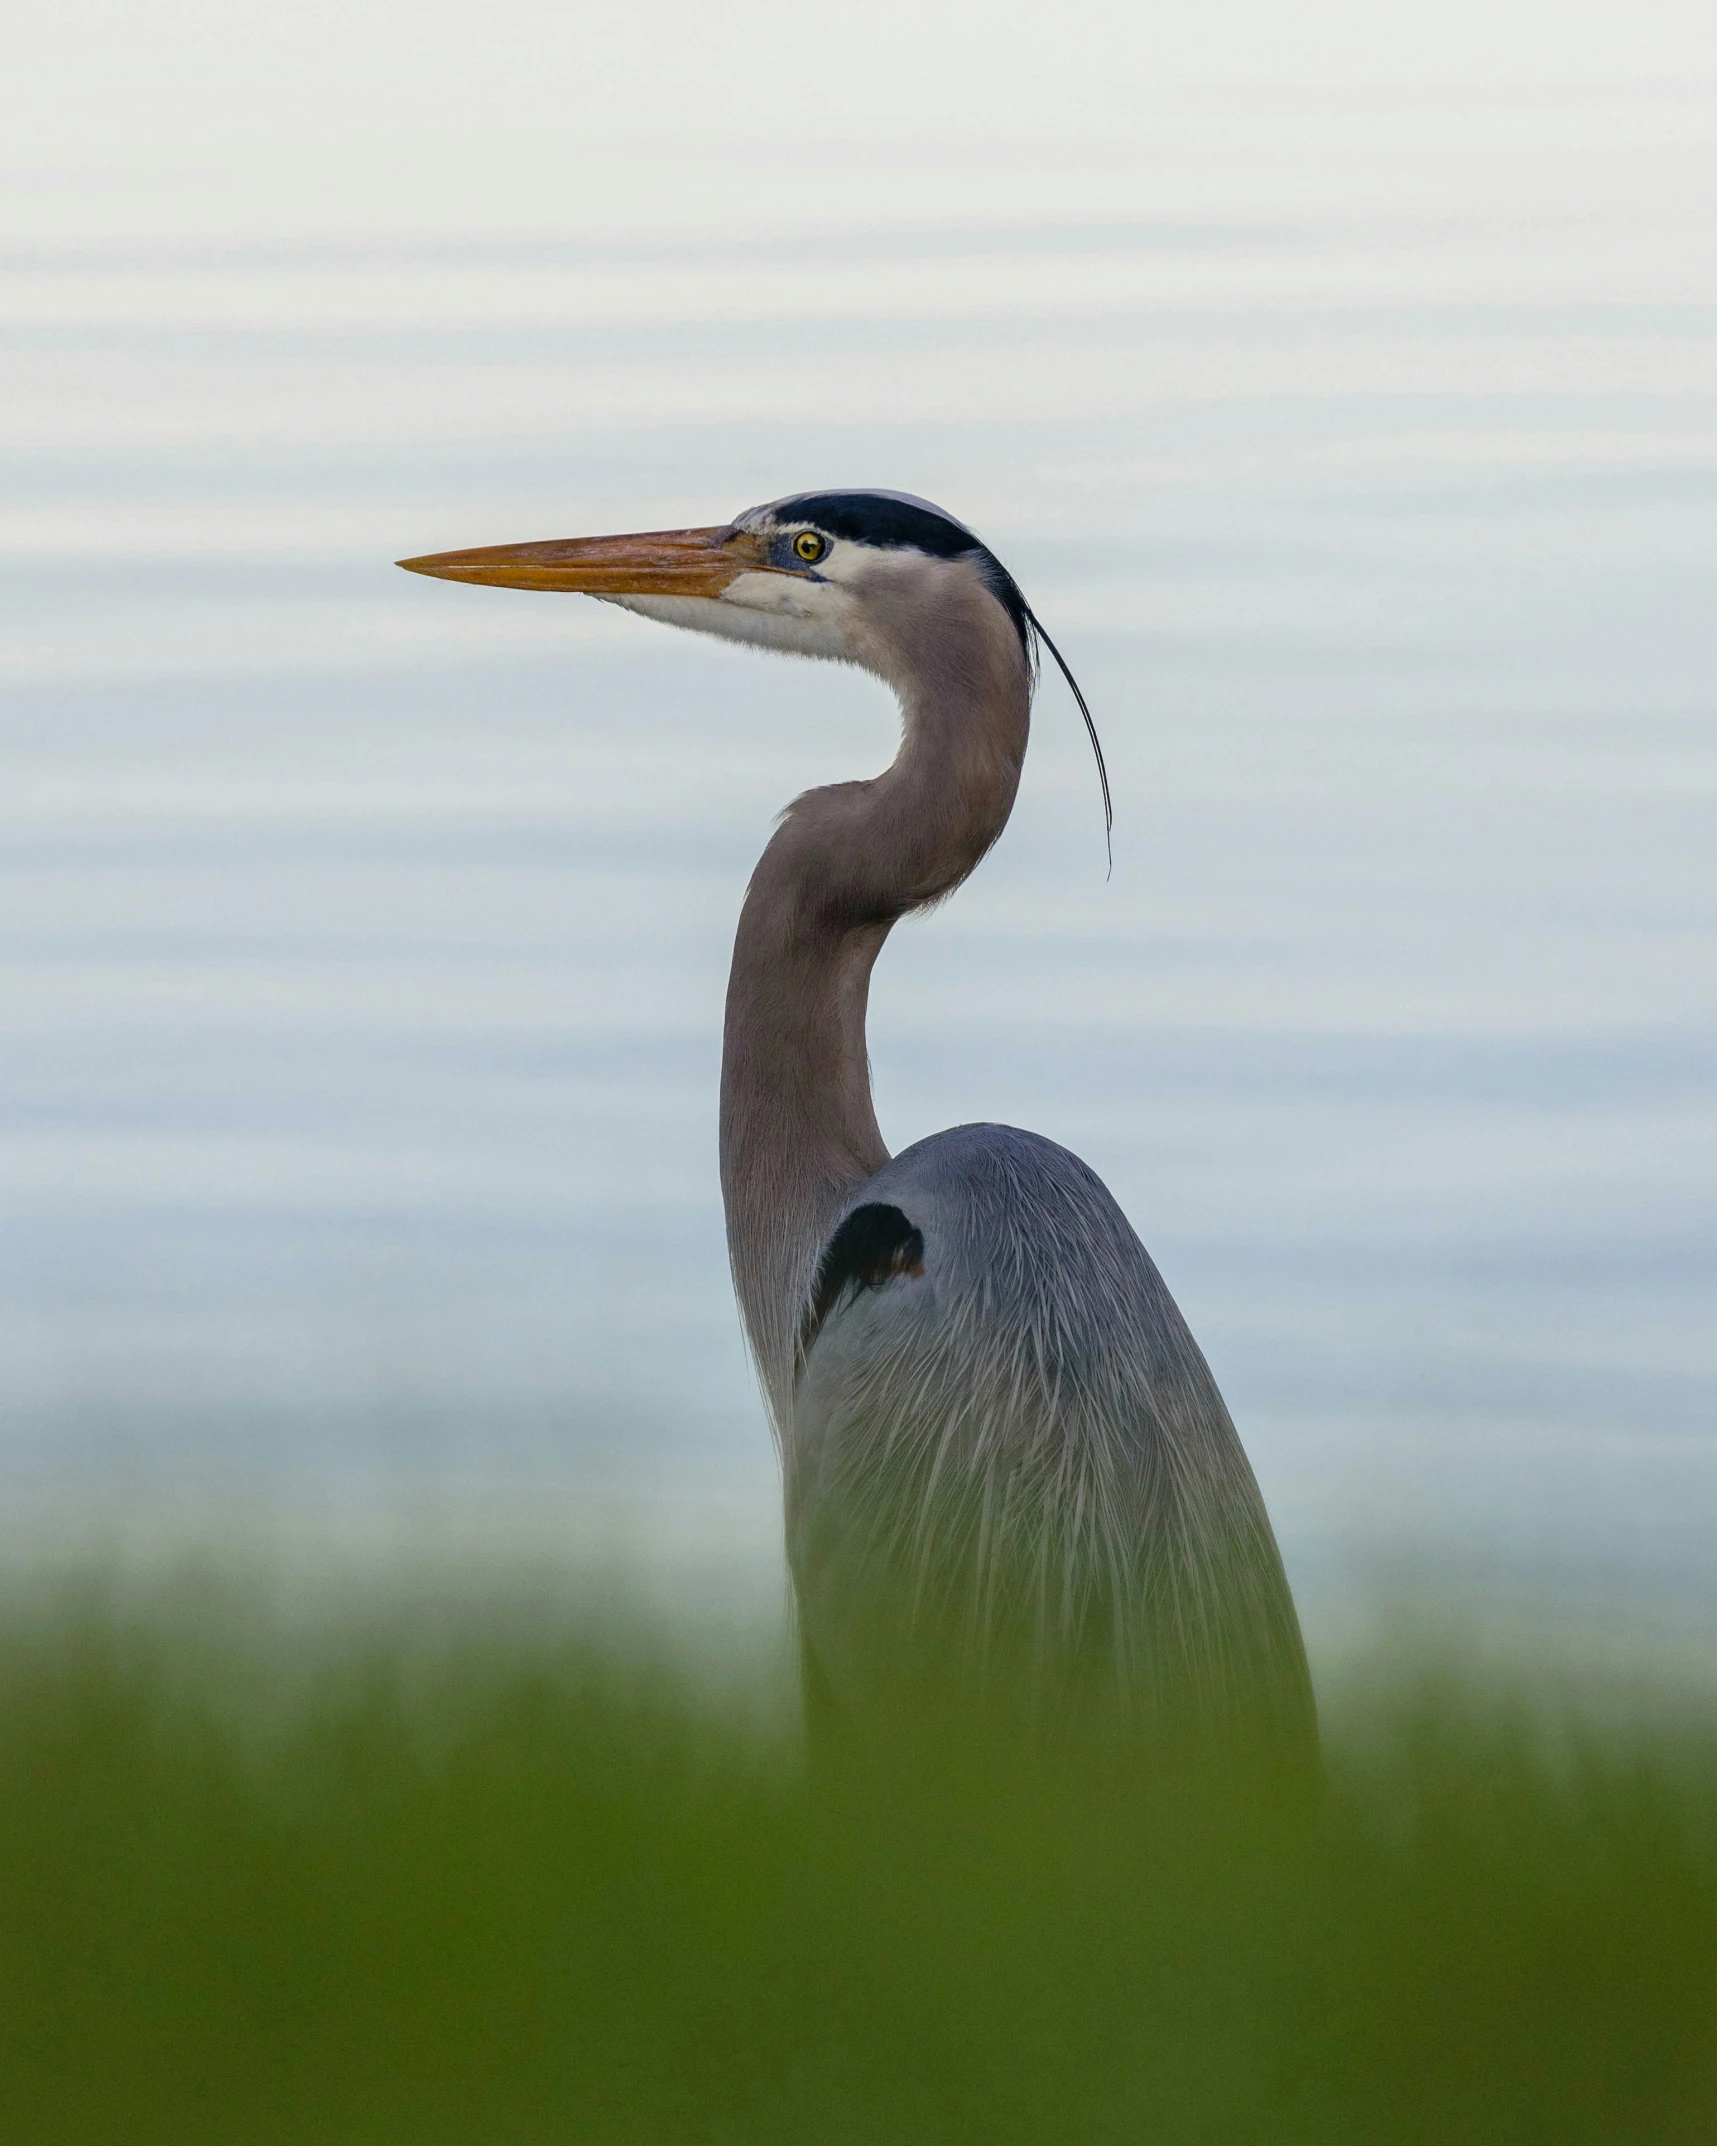 a heron with a long neck and long legs